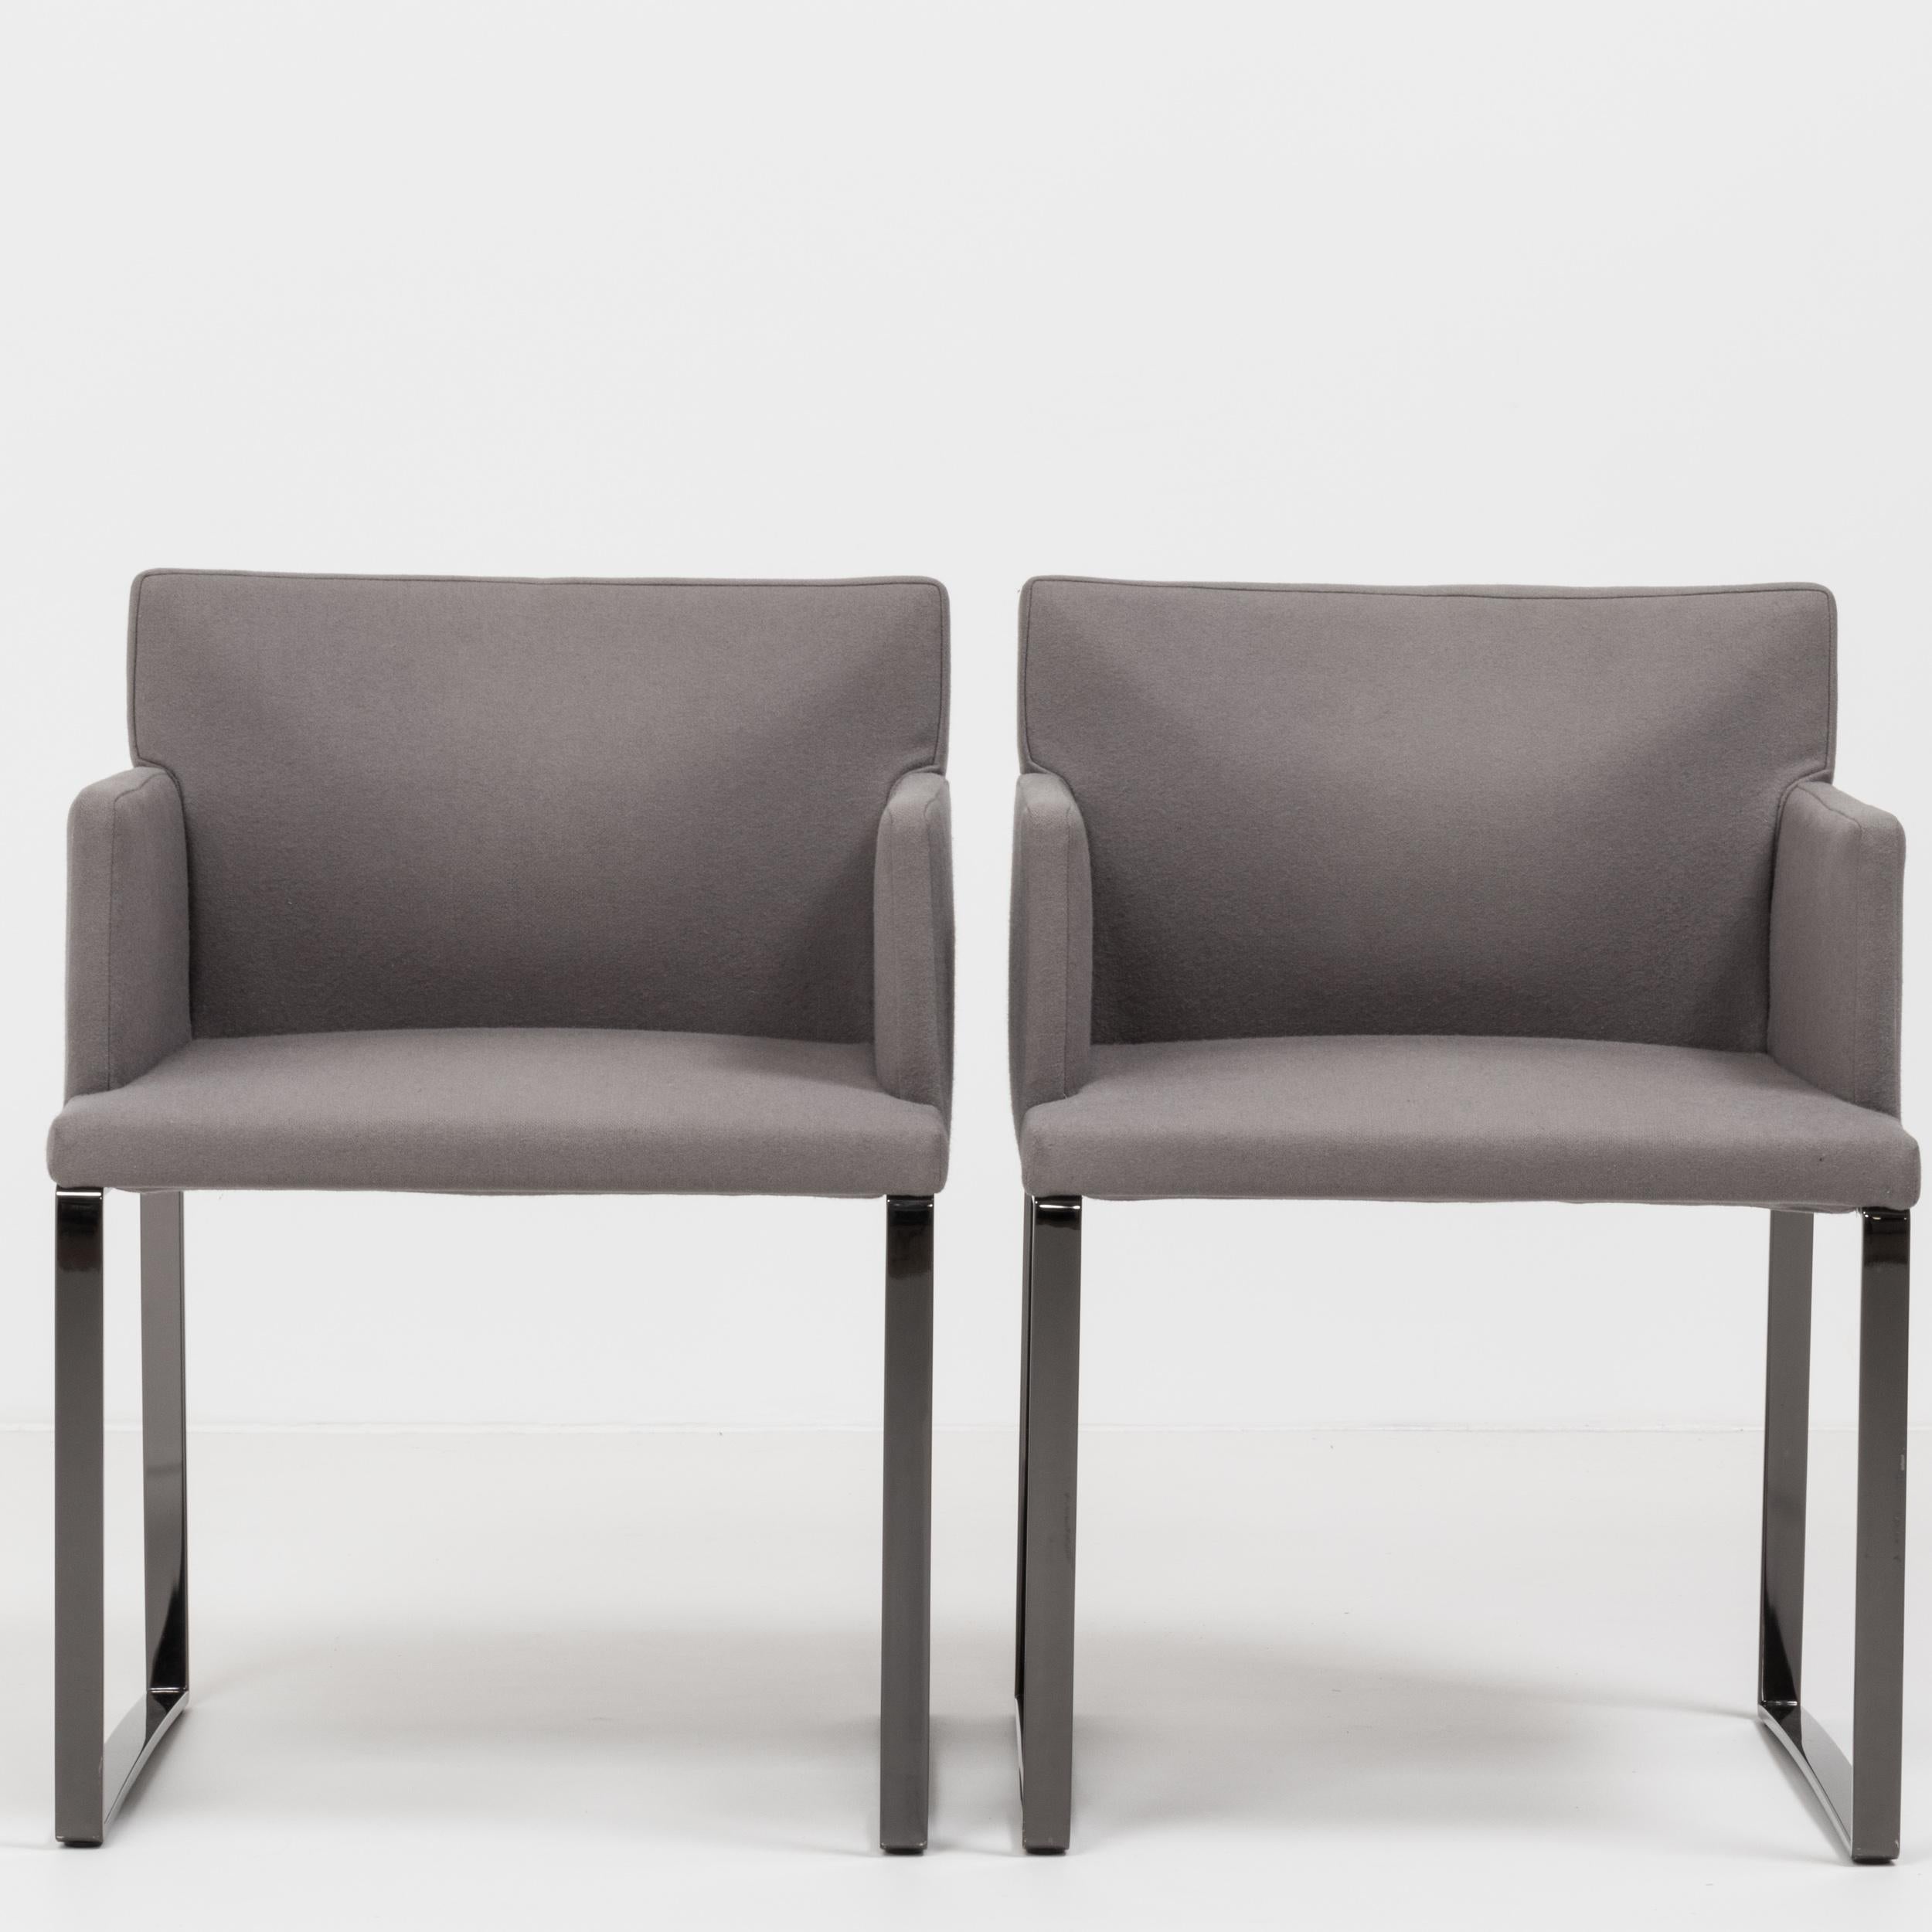 Designed by Rodolfo Dordoni for Minotti, these flat-base Flynt dining chairs have a sleek and angular silhouette.

Featuring square, glossy pewter metal frames, the Italian carver chairs are upholstered in grey wool fabric with a padded back and